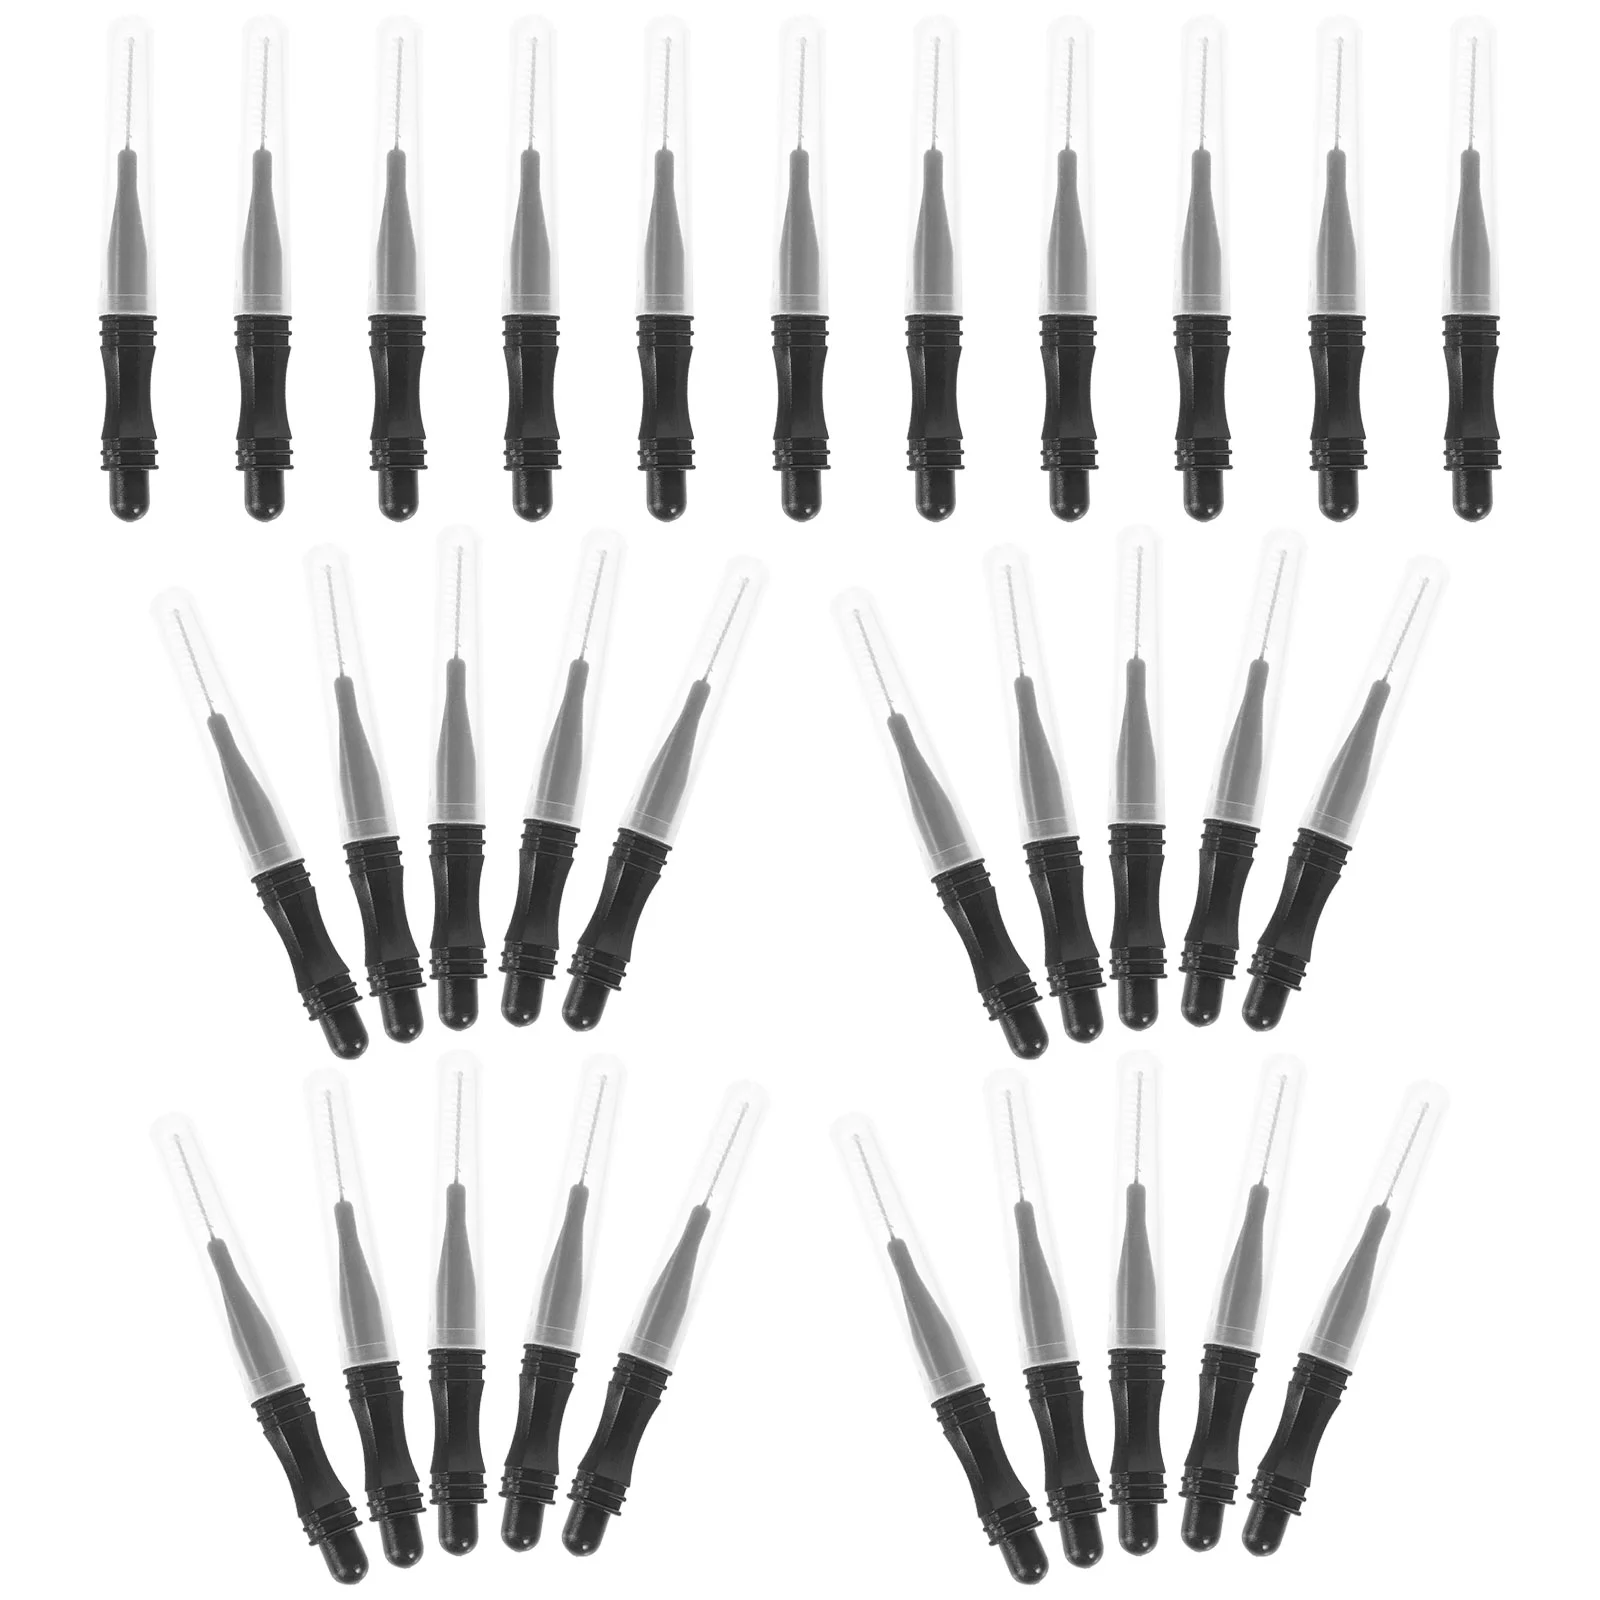 

50 Pcs Eye Lash Brow Brushes Eyebrow with Cap Other Oral Care Chemicals for Eyelash Extensions Mascara Eyelashes Miss